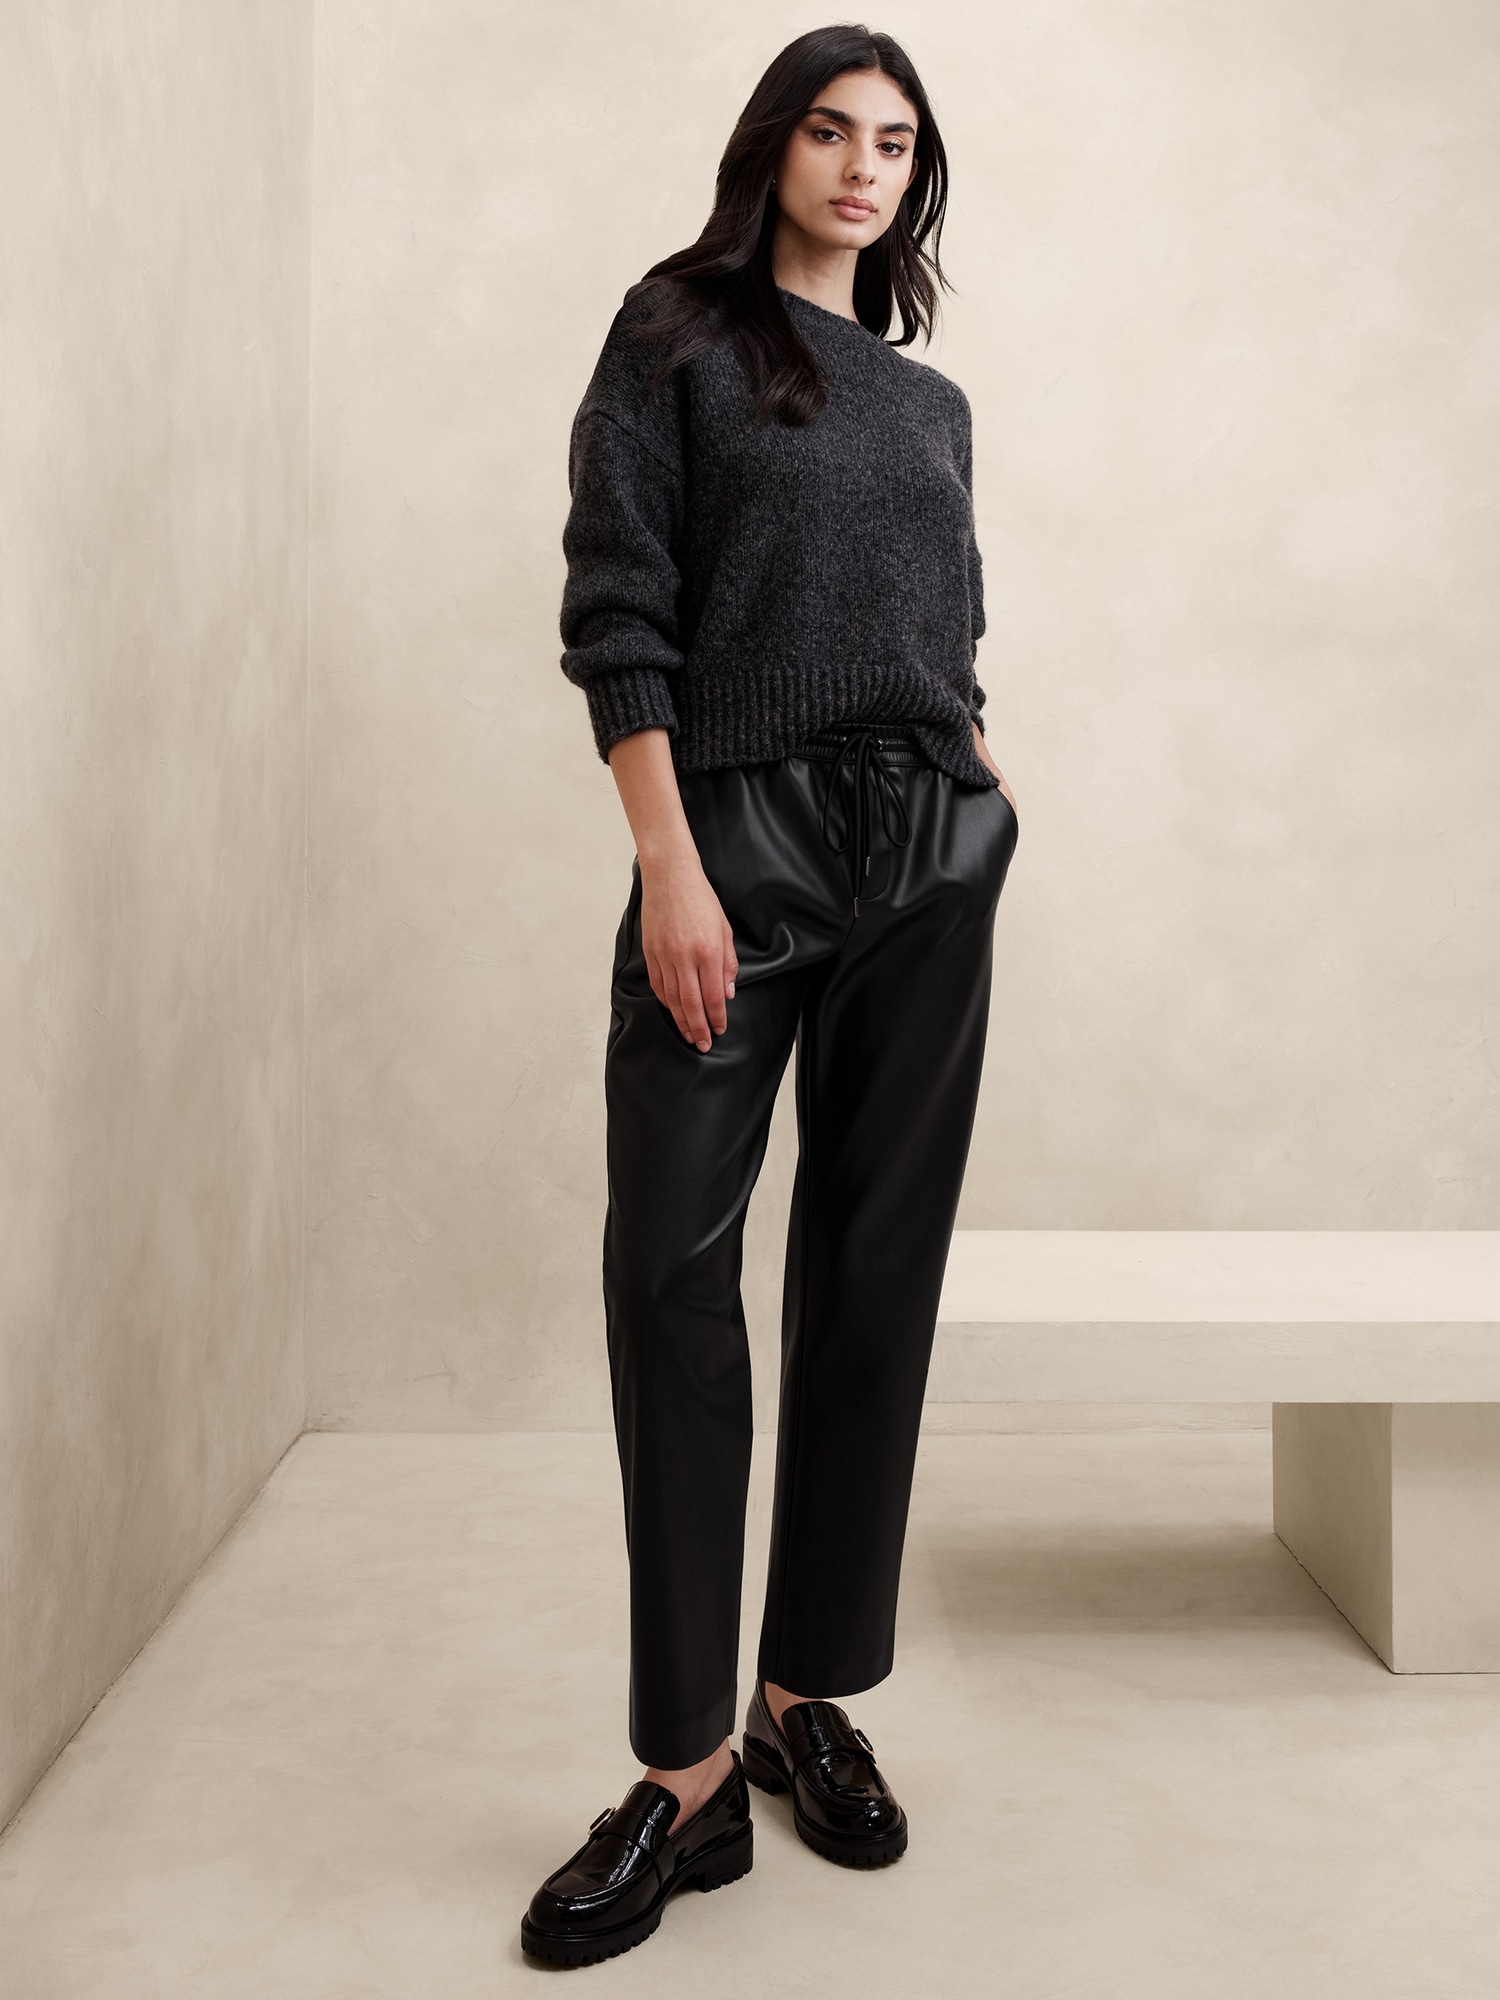 The faux-leather pant you need for fall from Banana Republic.